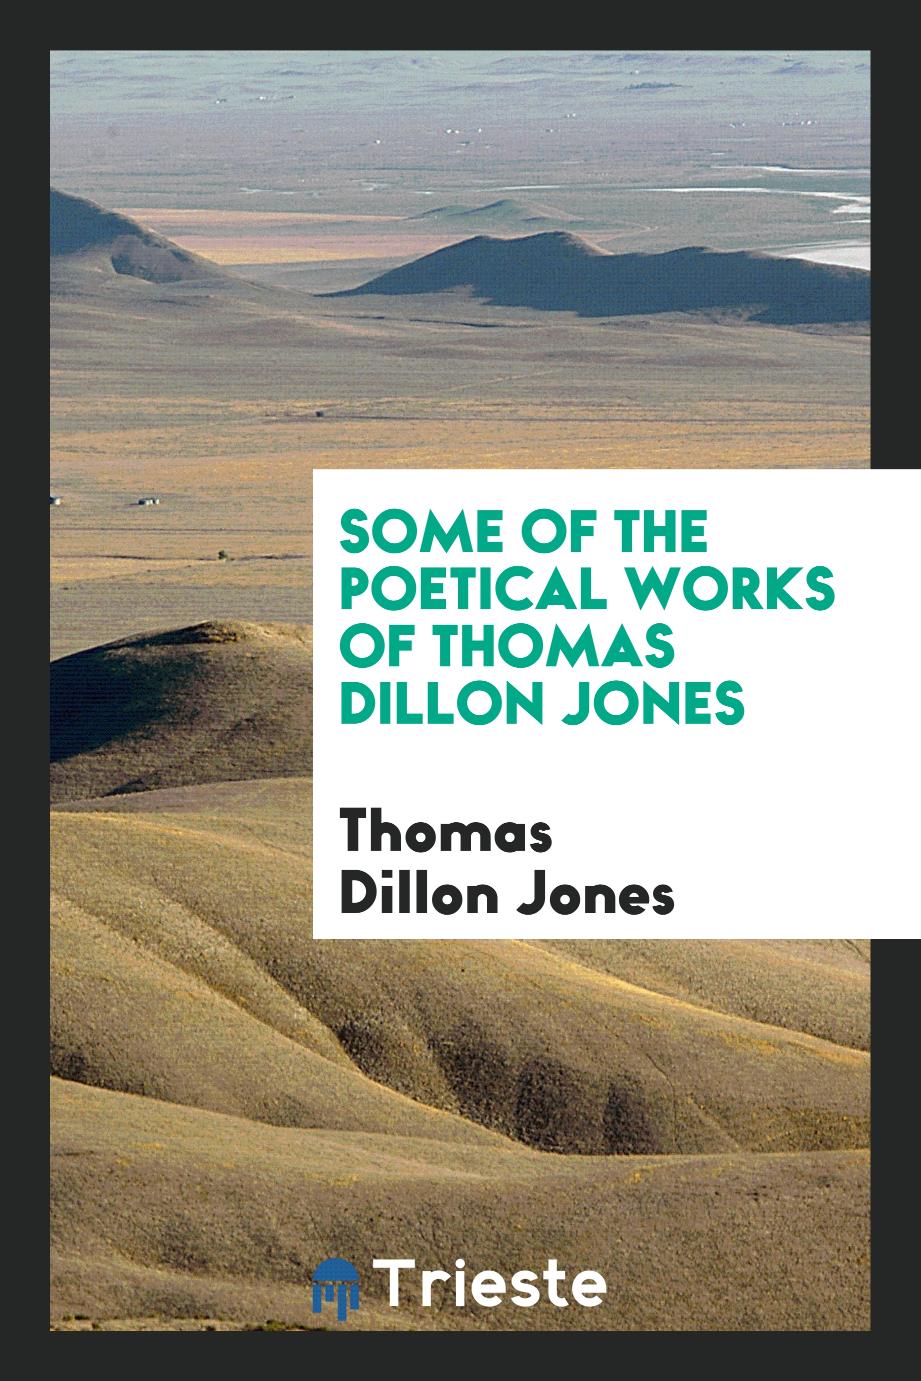 Some of the poetical works of Thomas Dillon Jones